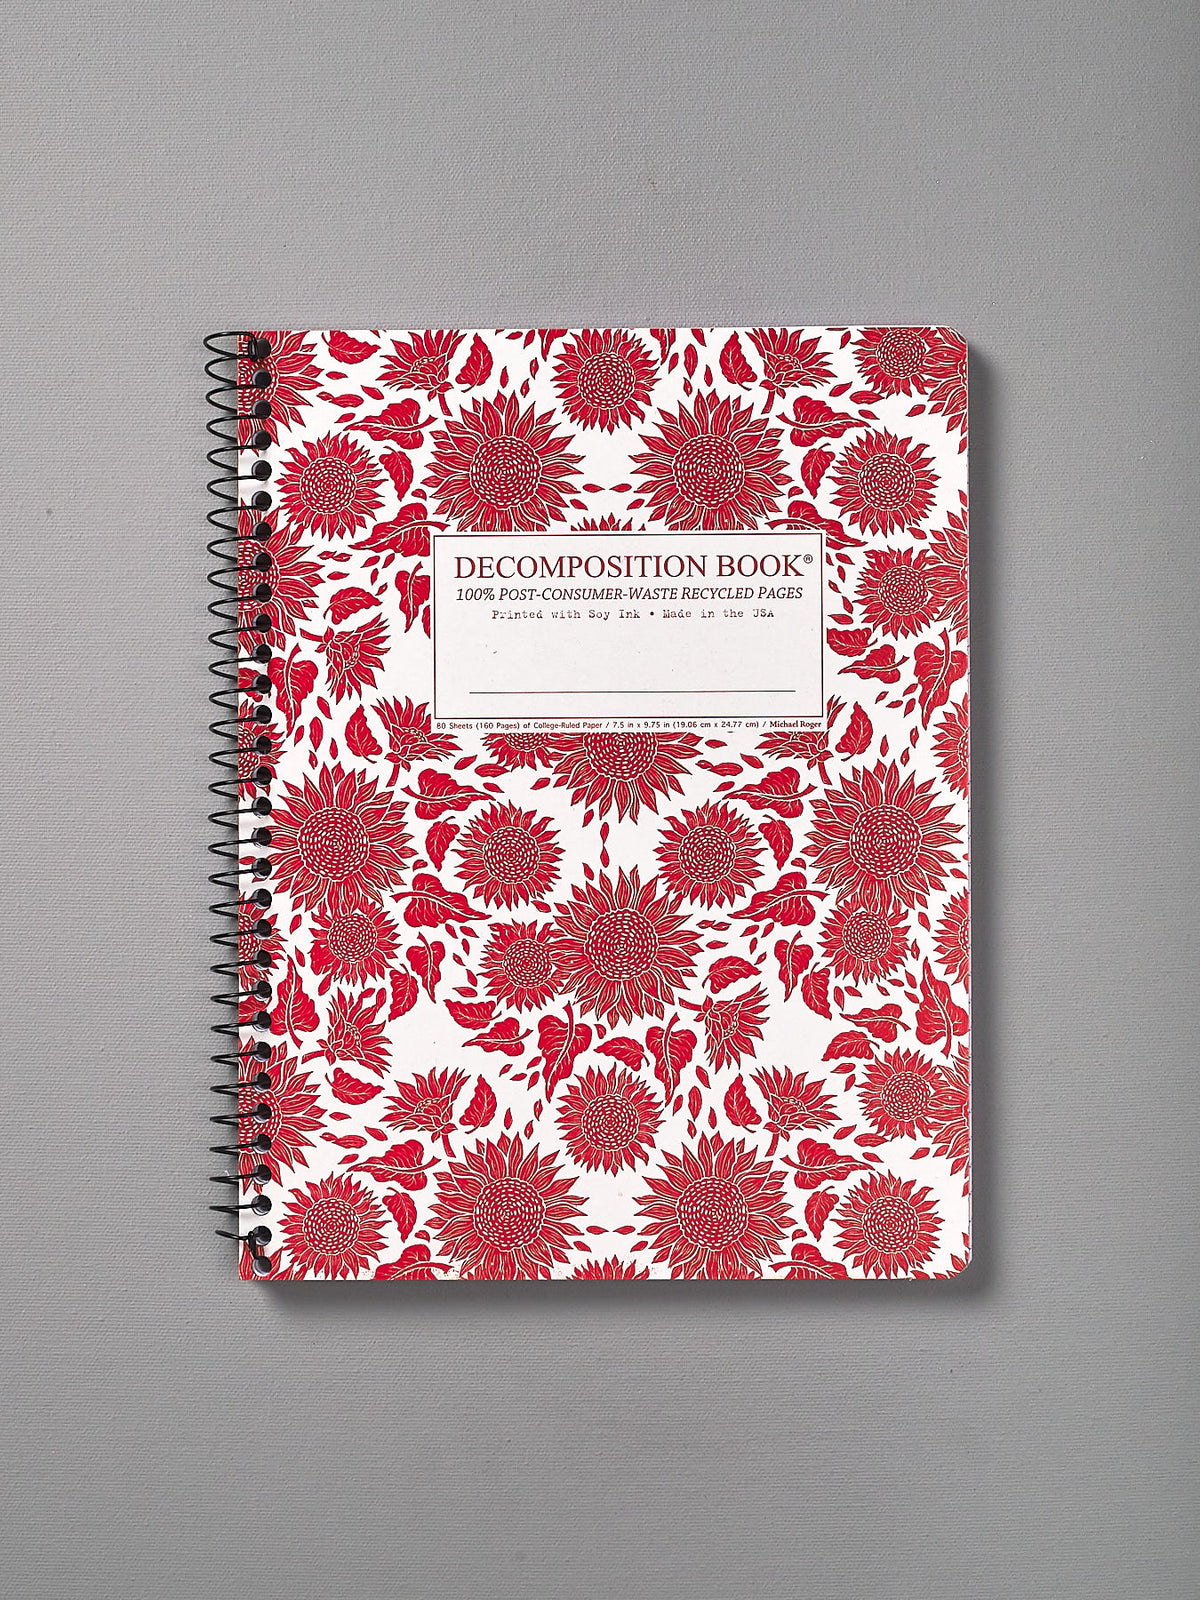 A Decomposition Recycled Notebook – Large/Ruled (Sunflowers) with red and white flowers on it.